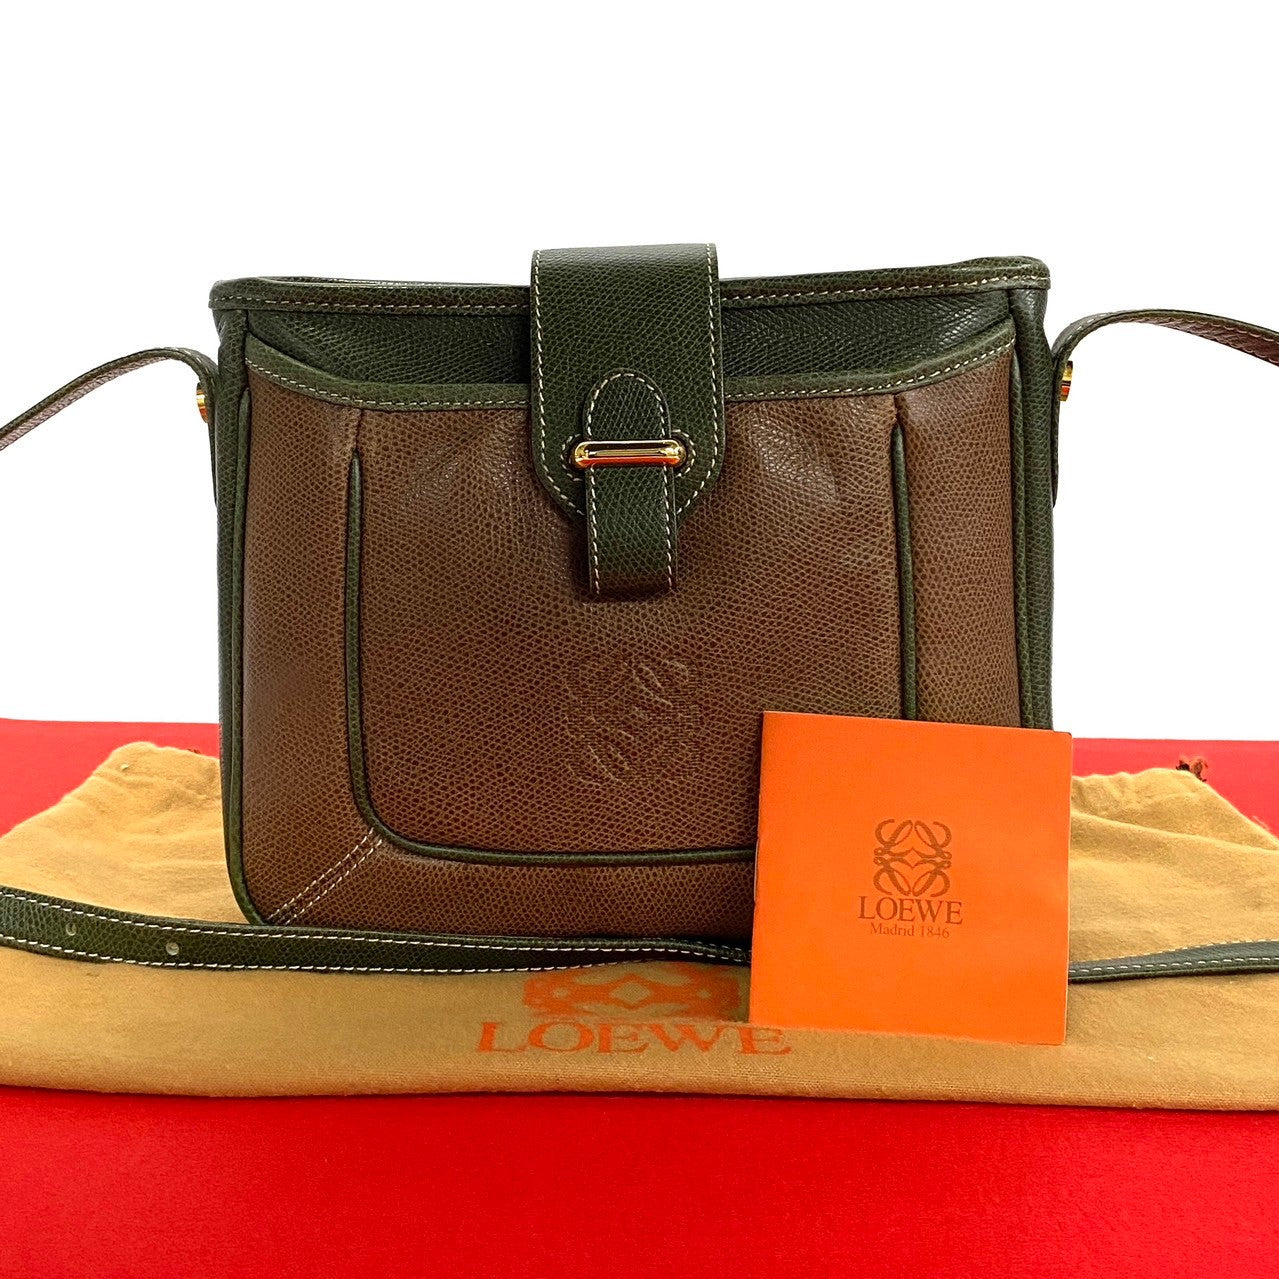 Loewe Leather Anagram Crossbody Bag  Leather Crossbody Bag in Good condition